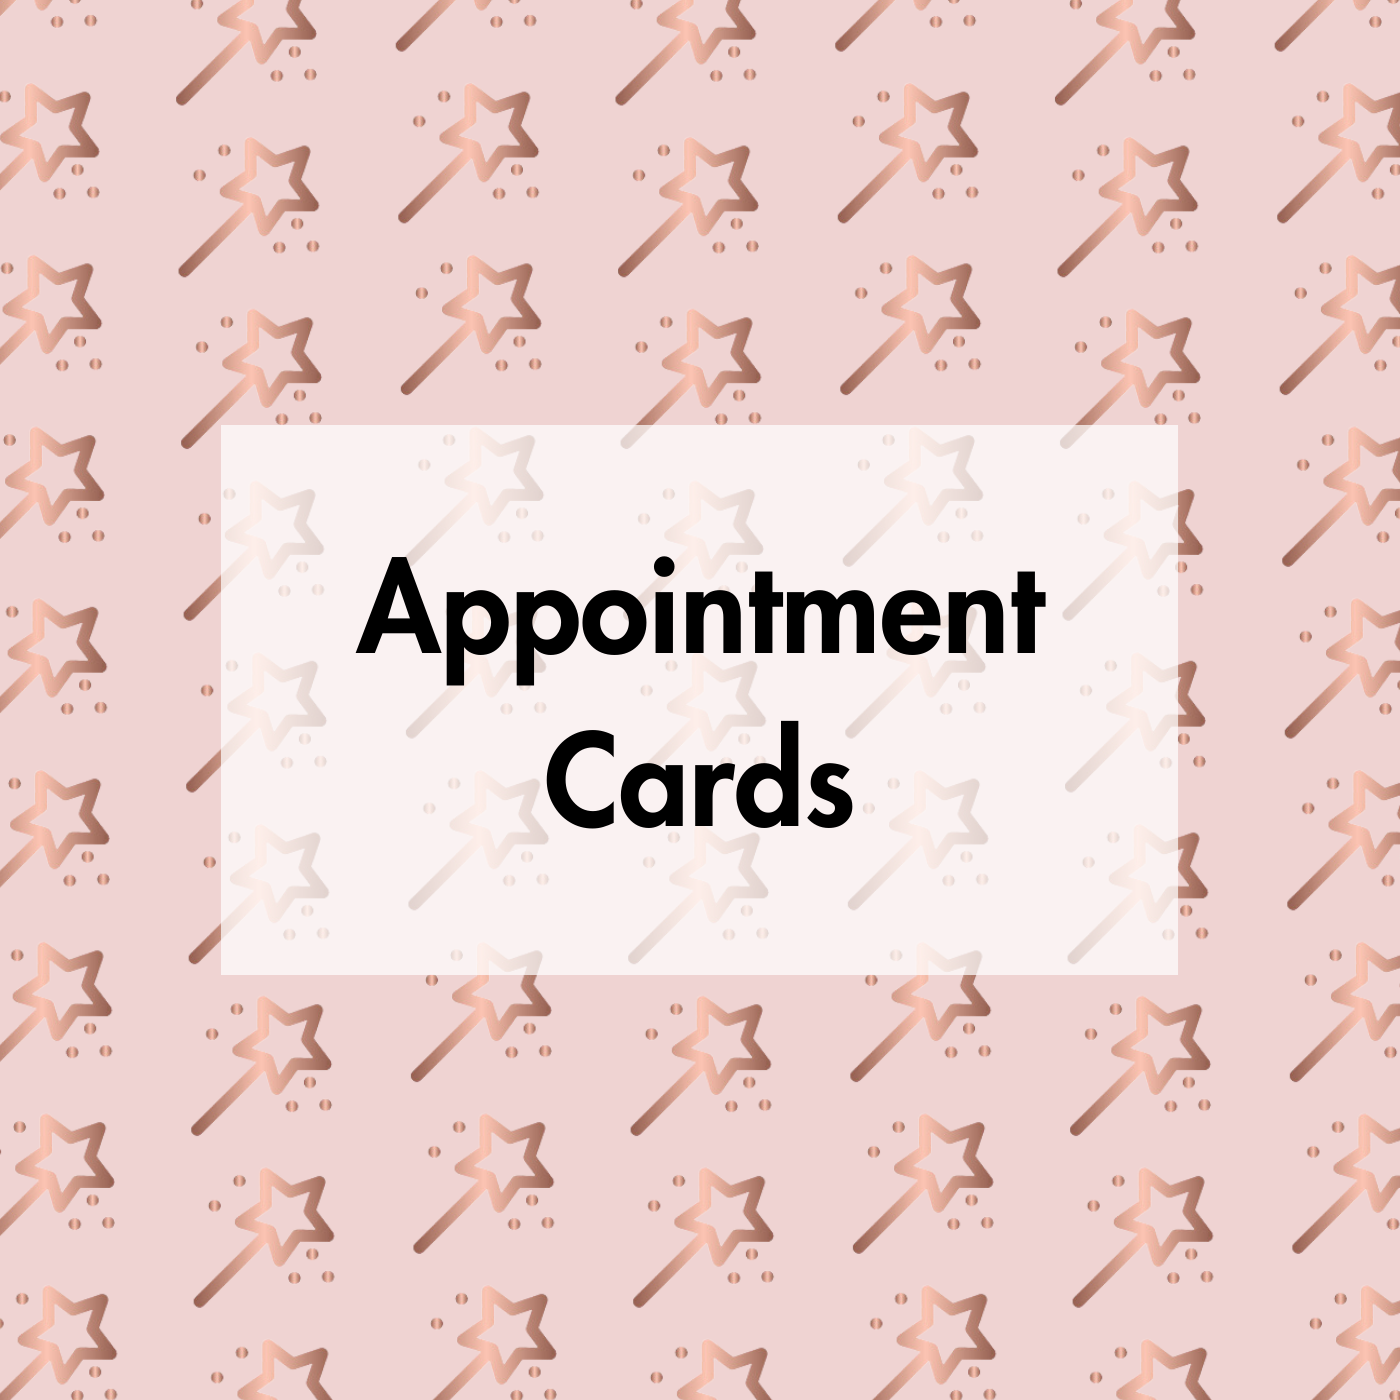 APPOINTMENT CARDS